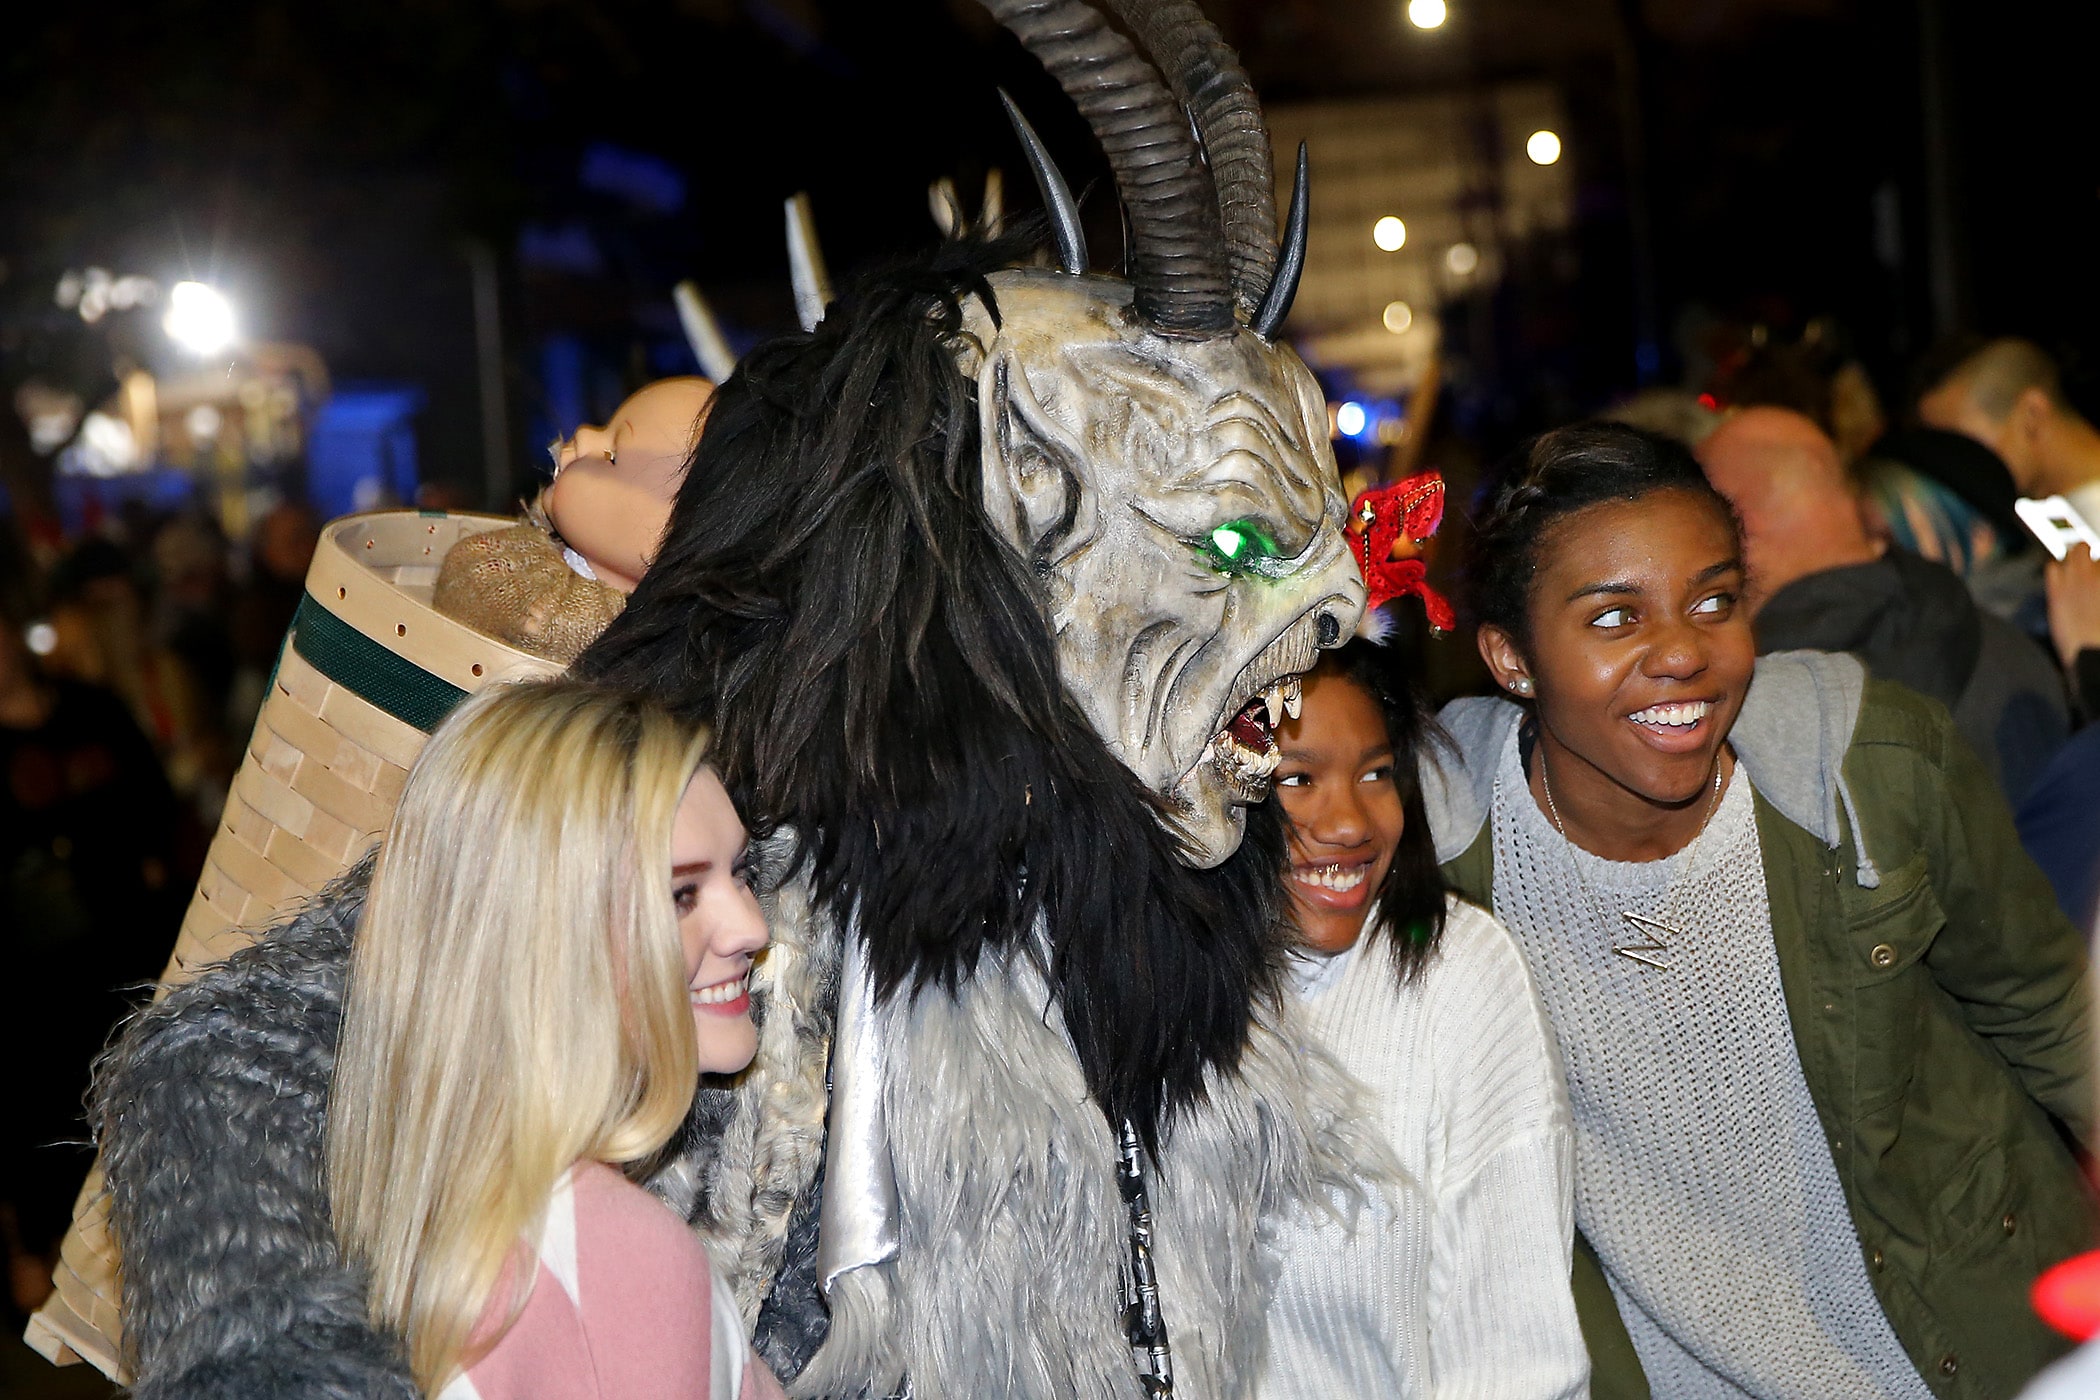 The Krampus pass by the crowd judging who is naughty and nice as the Krewe of Krampus holds their annual Krampus NOLAuf parade down Royal Street and through the Bywater on Saturday, December 7, 2019.